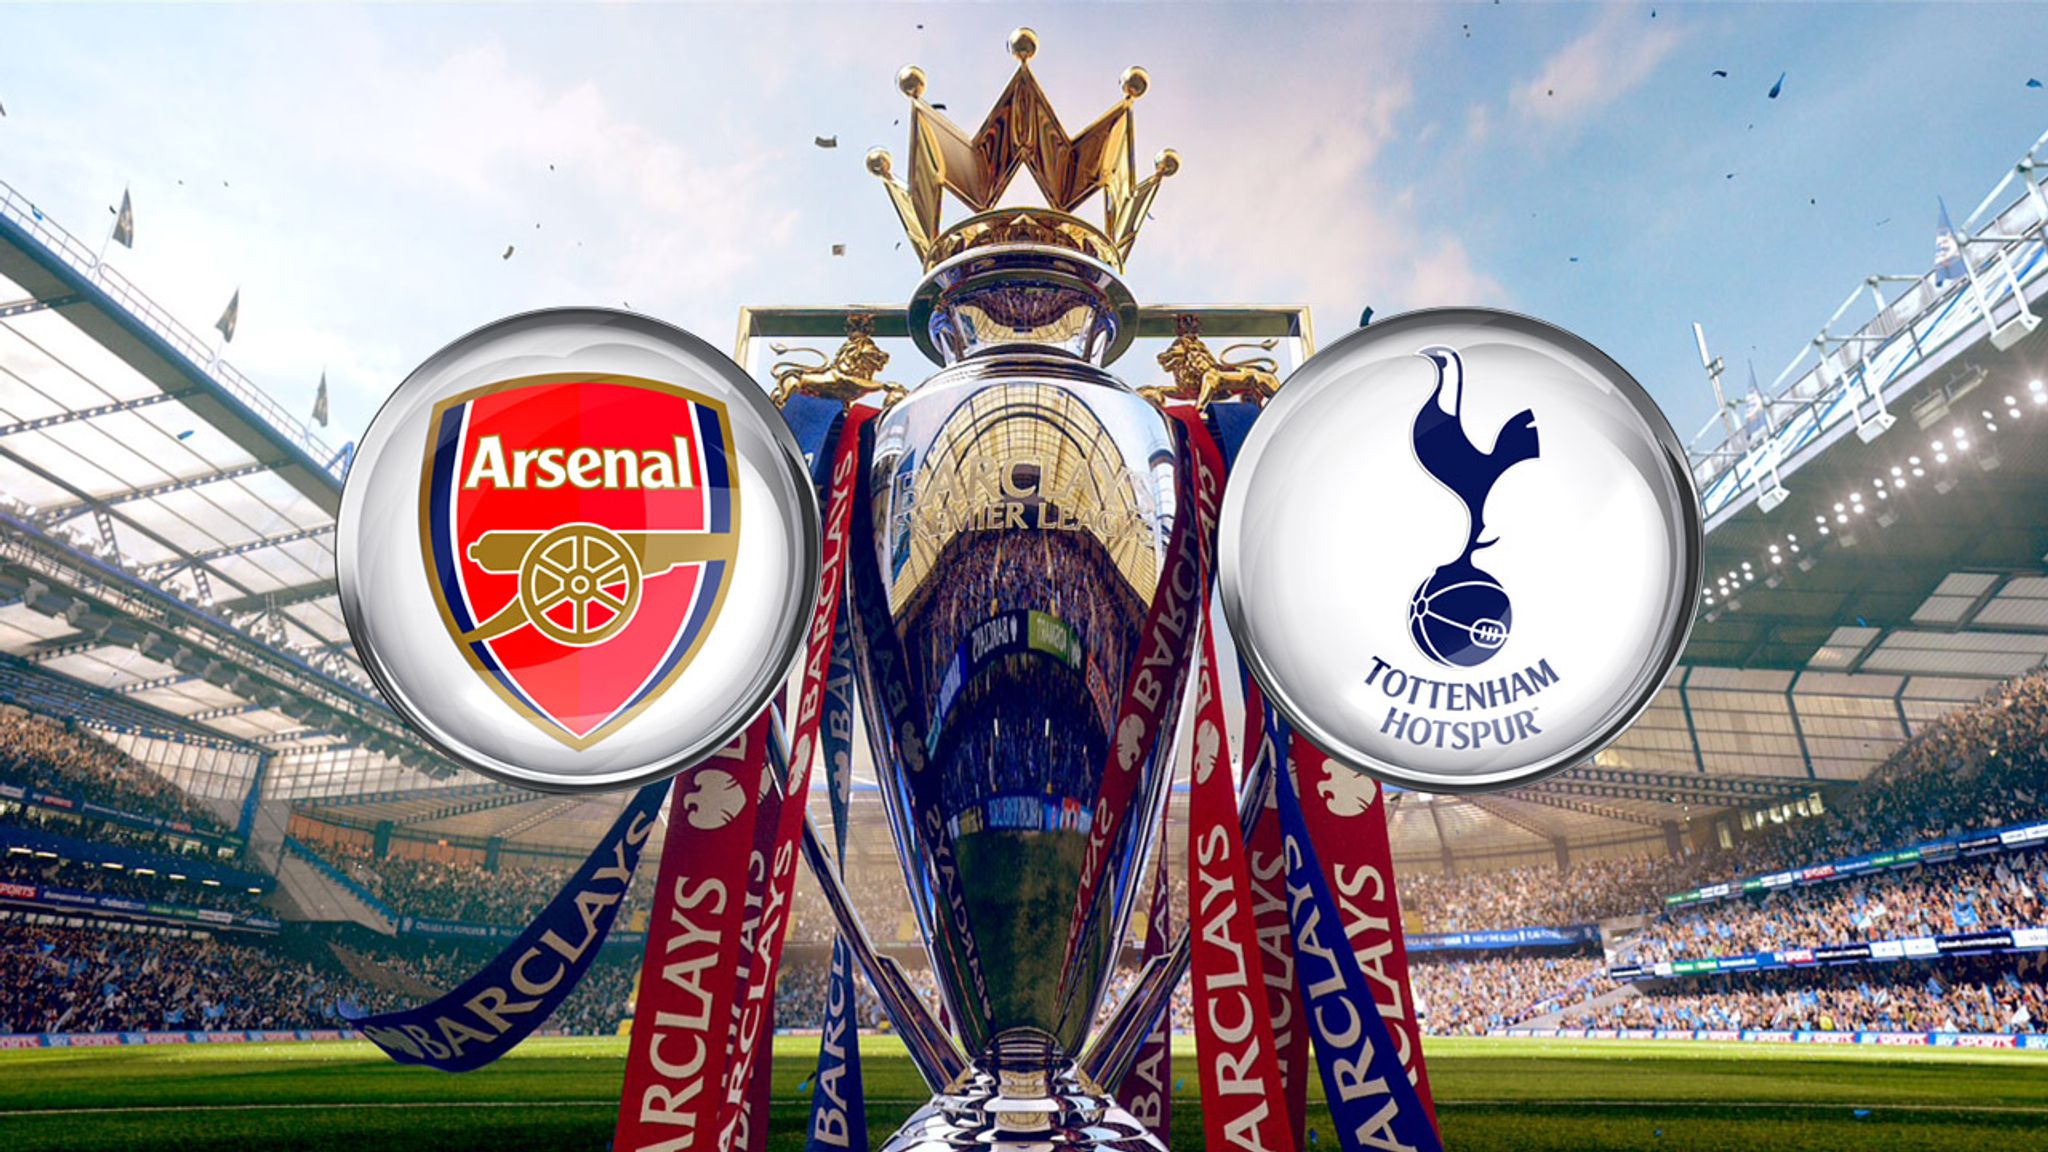 Arsenal v Tottenham Hotspur preview Gunners hoping to continue title charge Football News Sky Sports